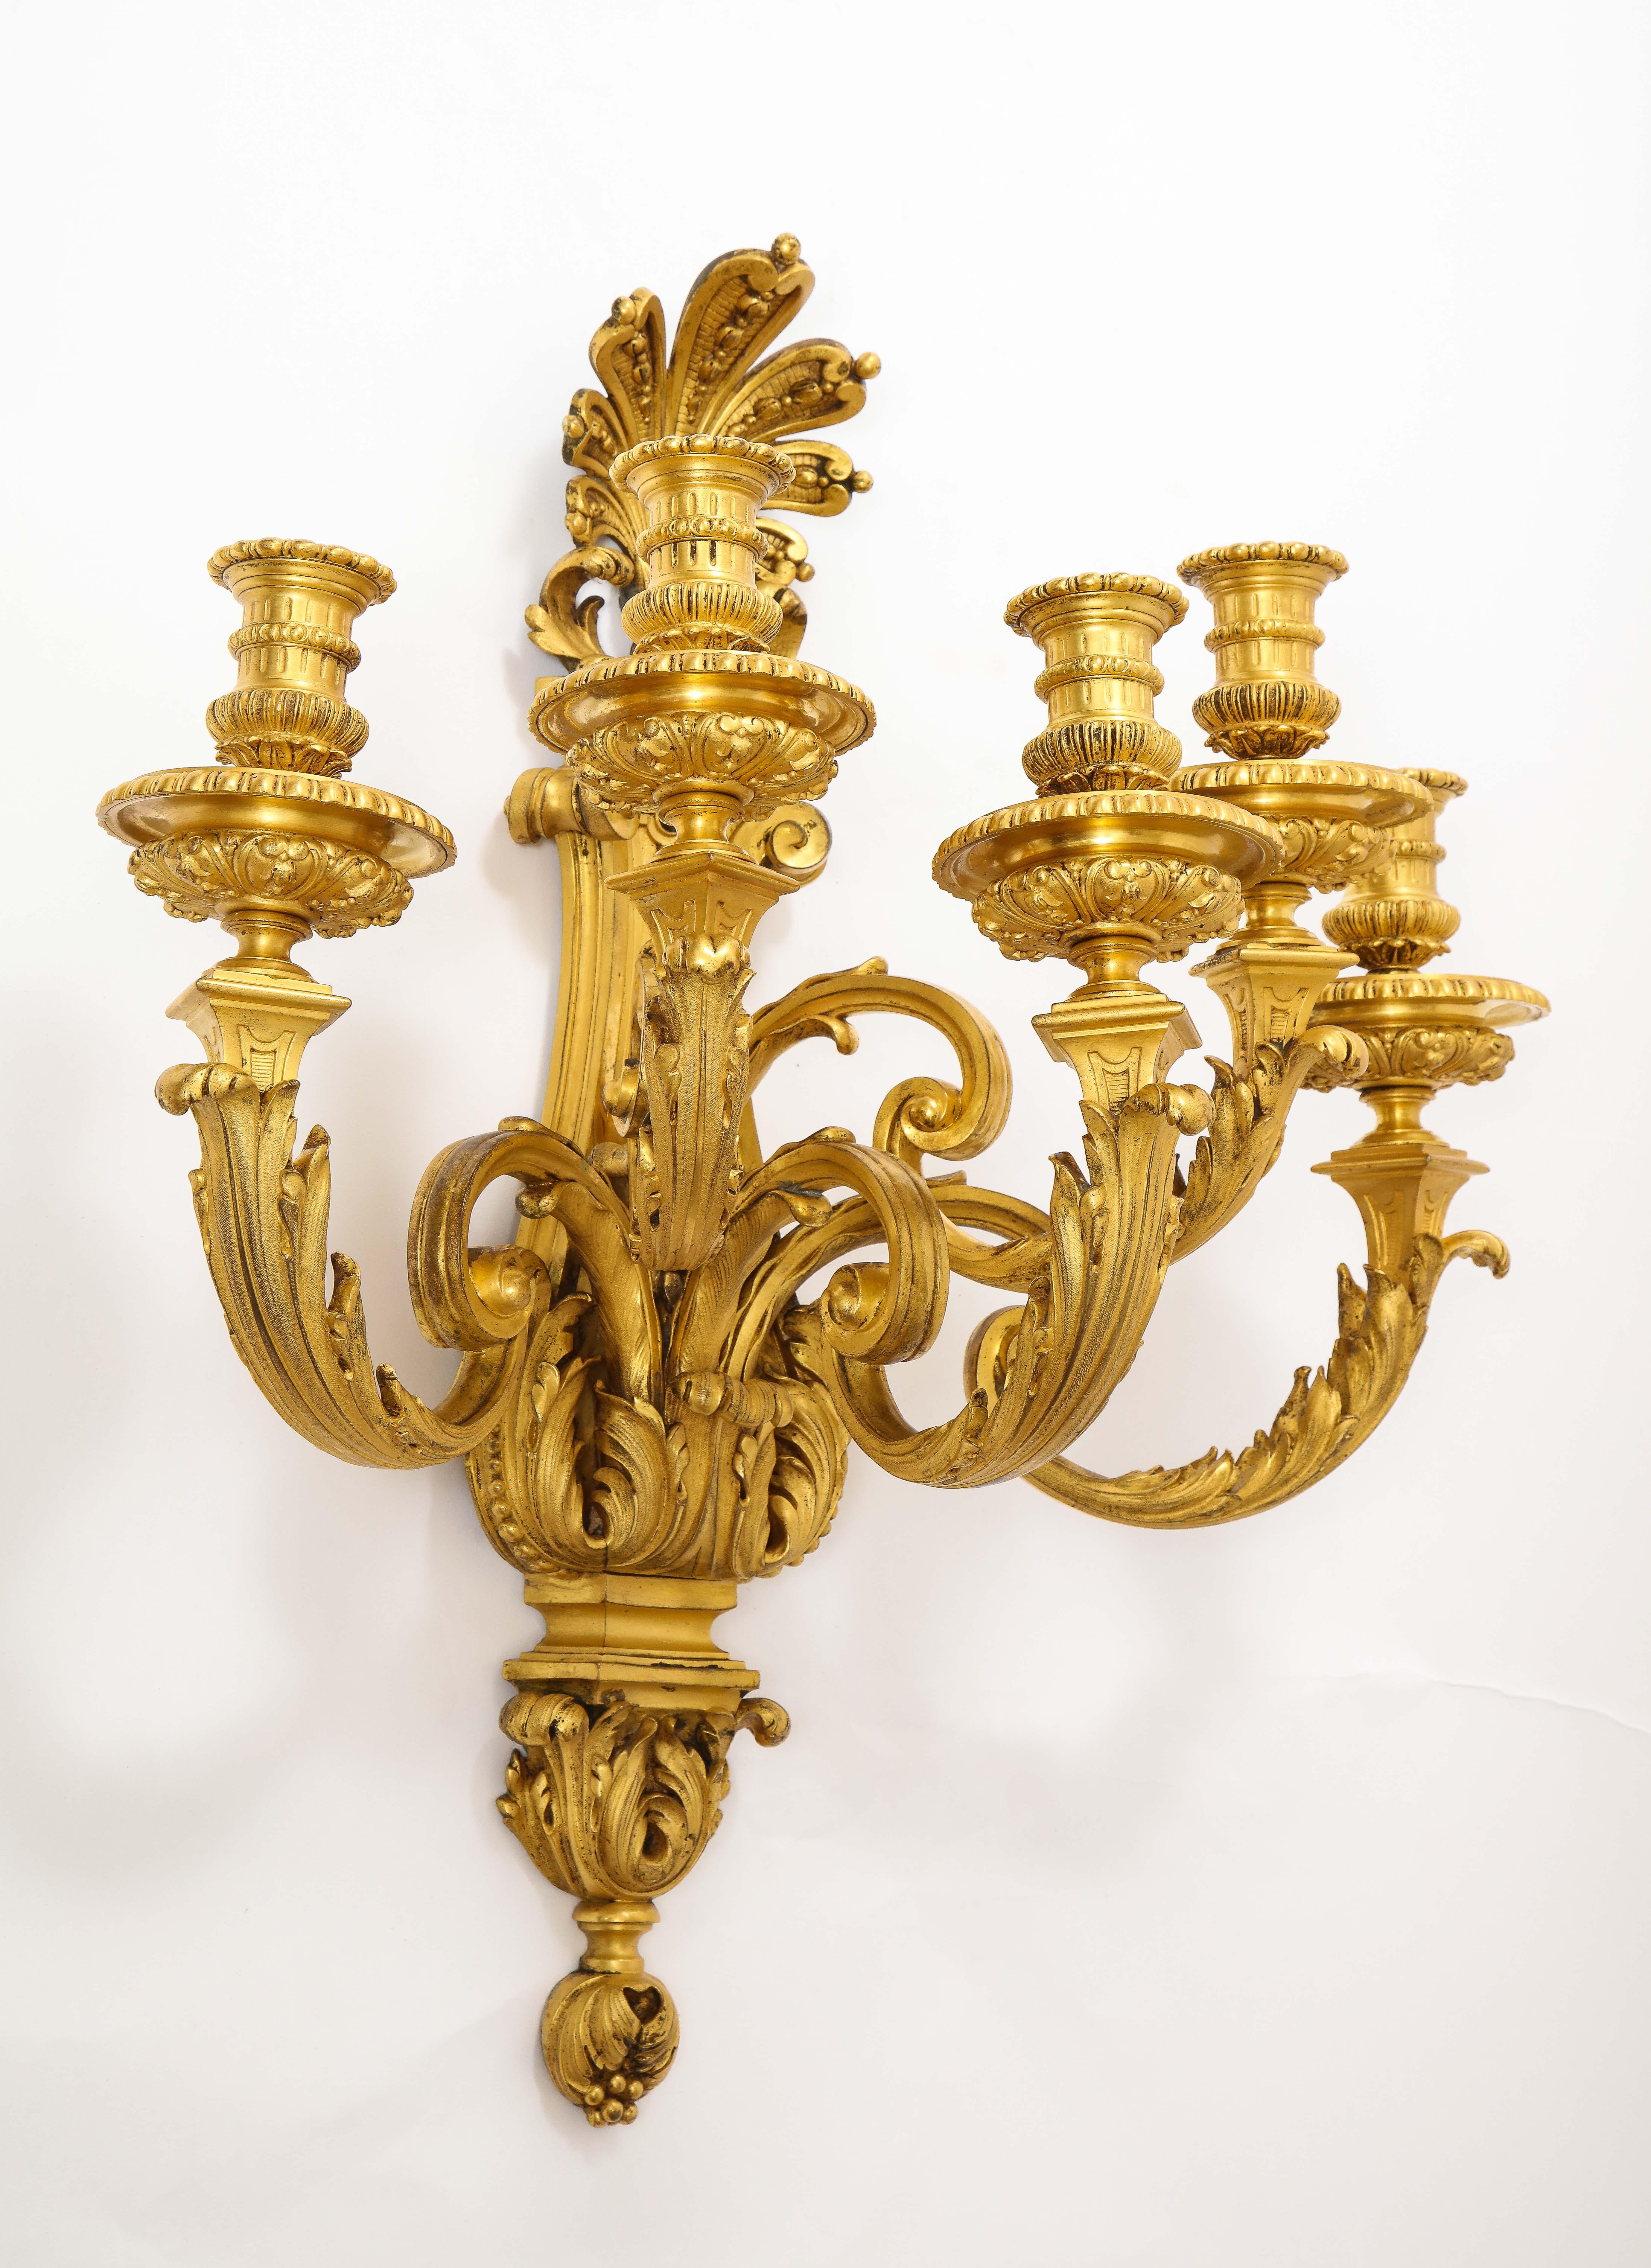 Pair of Monumental French Louis XVI Style Five-Arm Dore Bronze Sconces For Sale 3